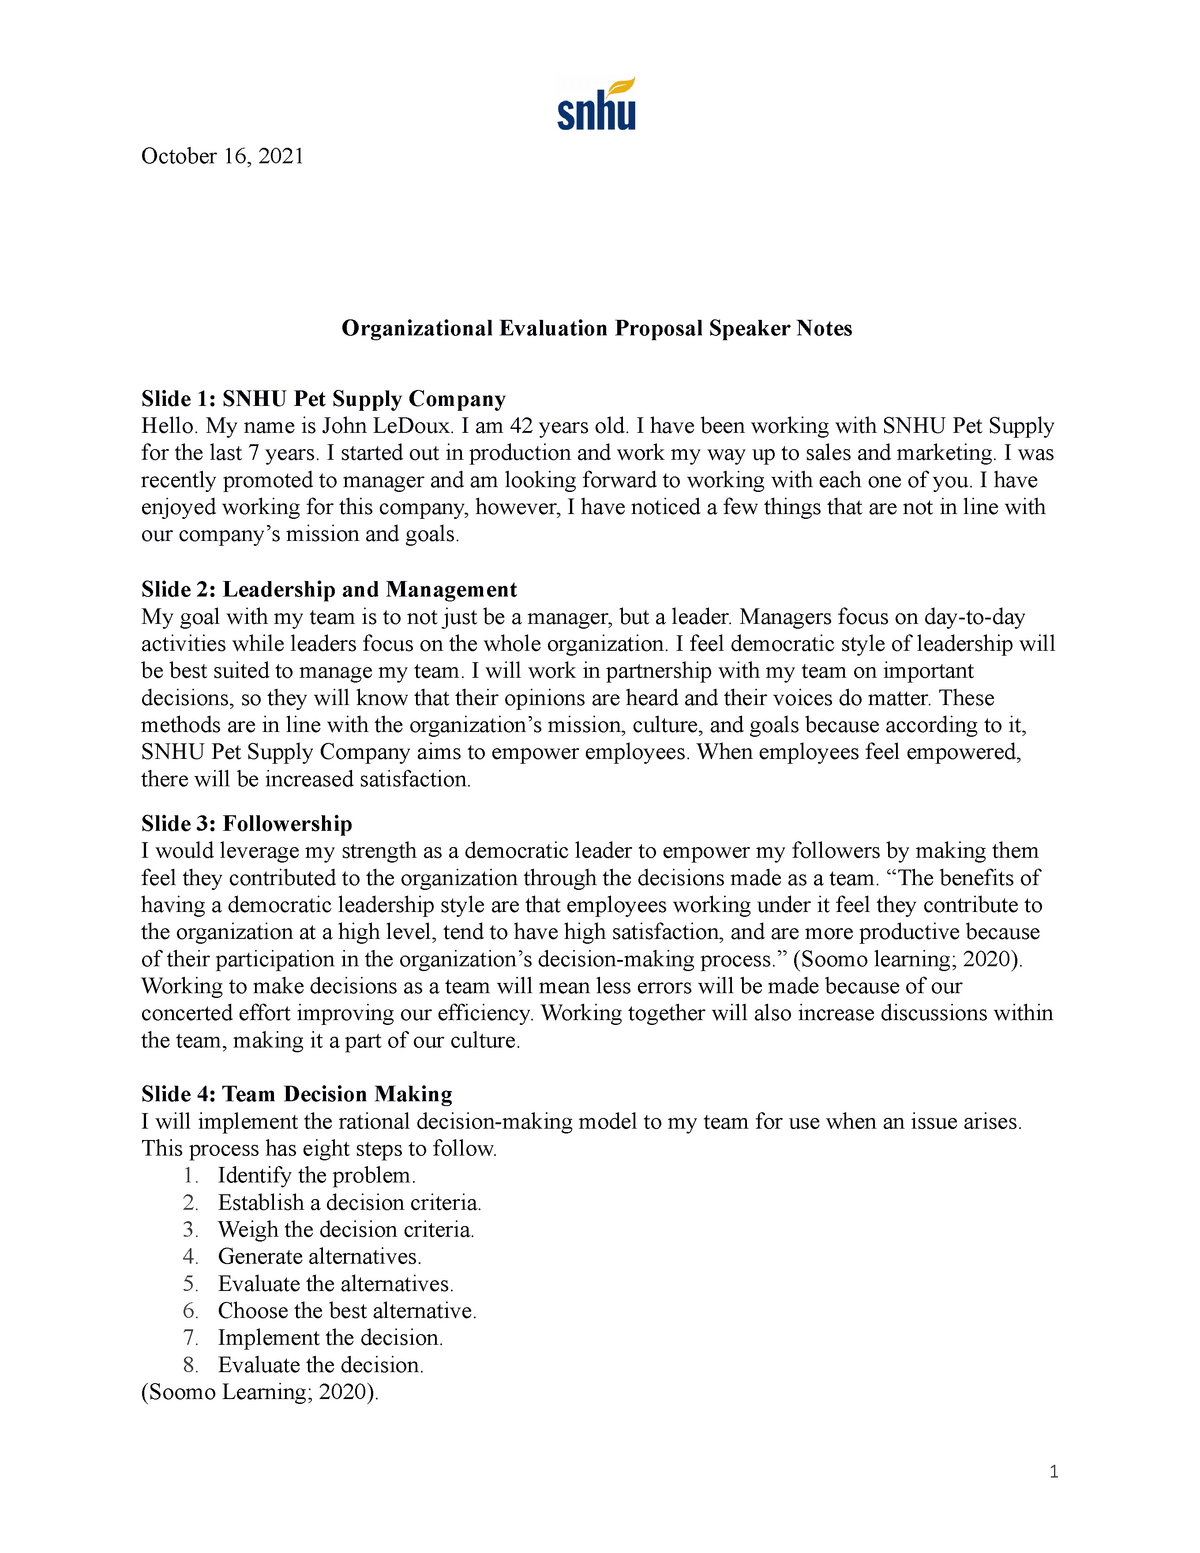 7 3 project one organizational evaluation proposal assignment